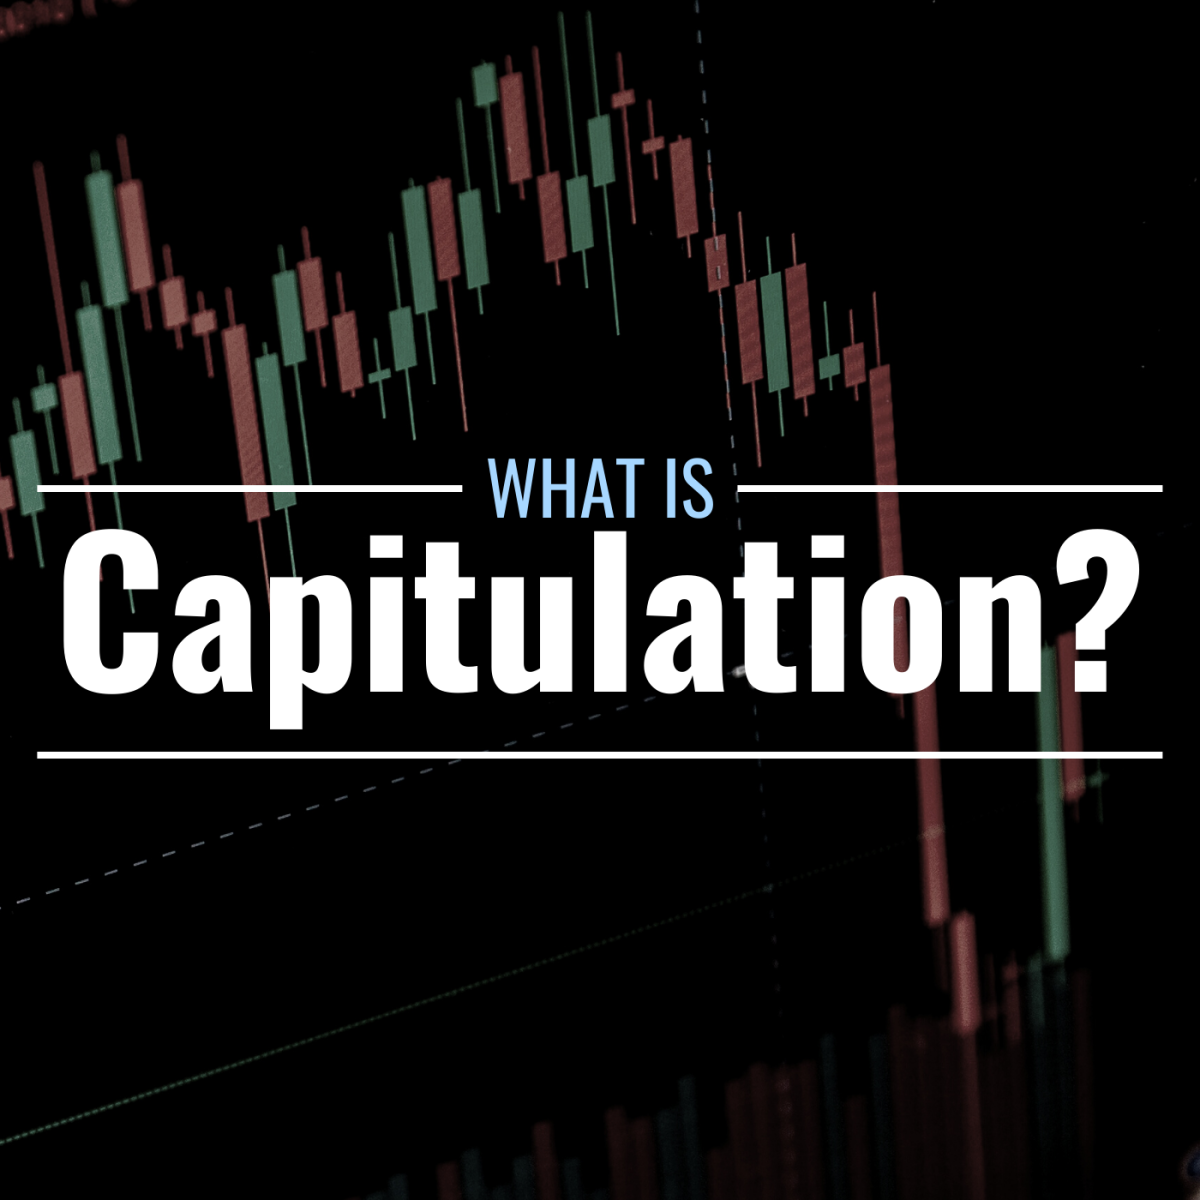 Darkened image of a candlestick chart with text overlay that reads "What Is Capitulation?"